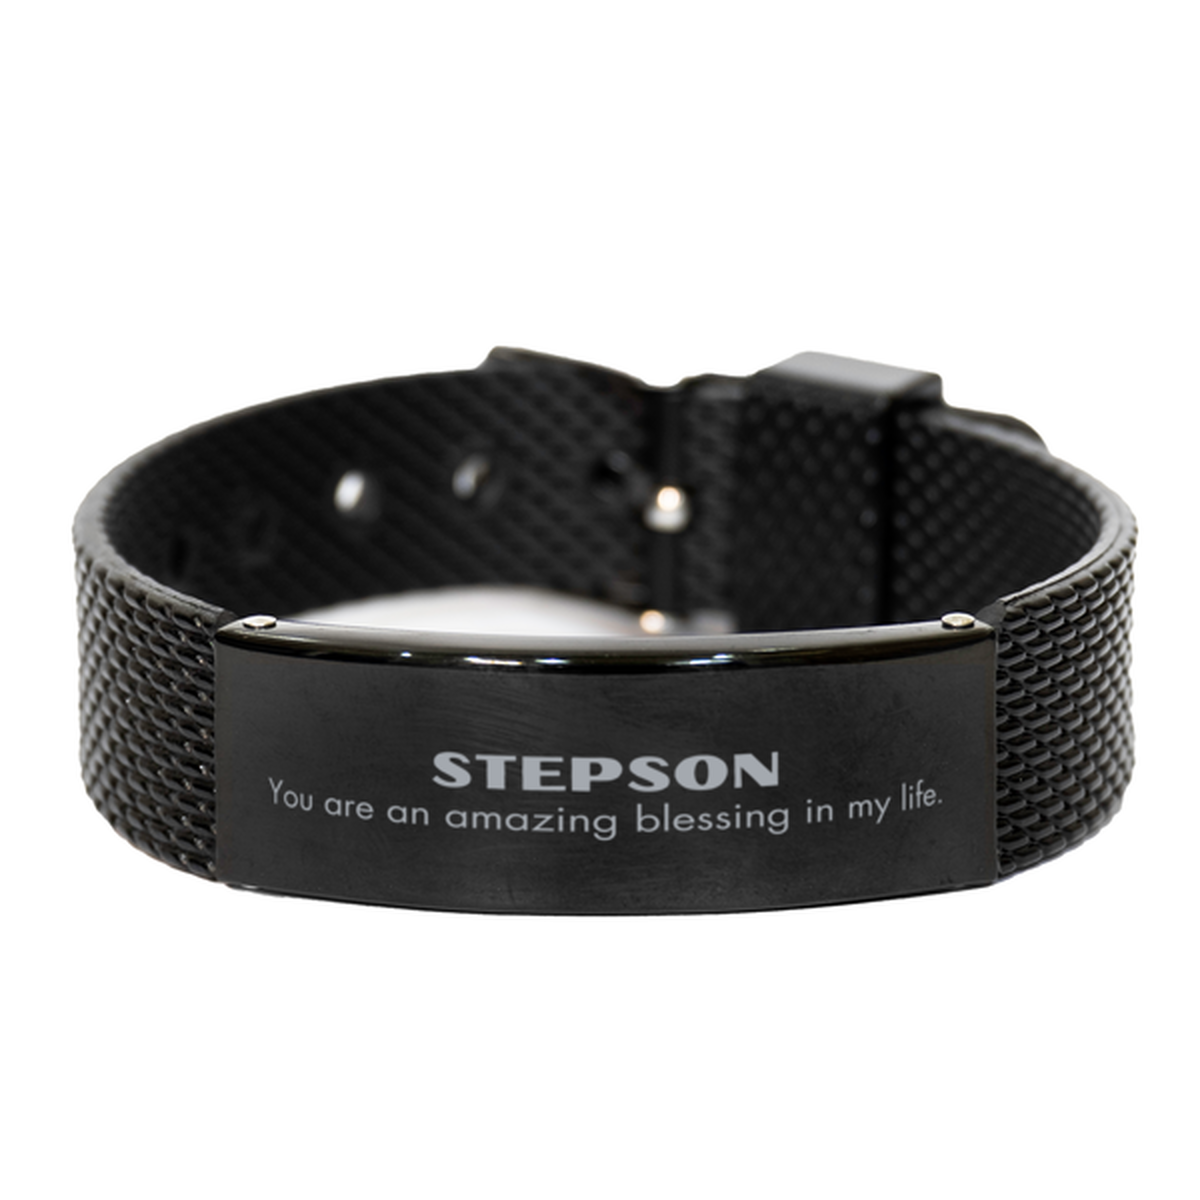 Stepson Black Shark Mesh Bracelet, You are an amazing blessing in my life, Thank You Gifts For Stepson, Inspirational Birthday Christmas Unique Gifts For Stepson